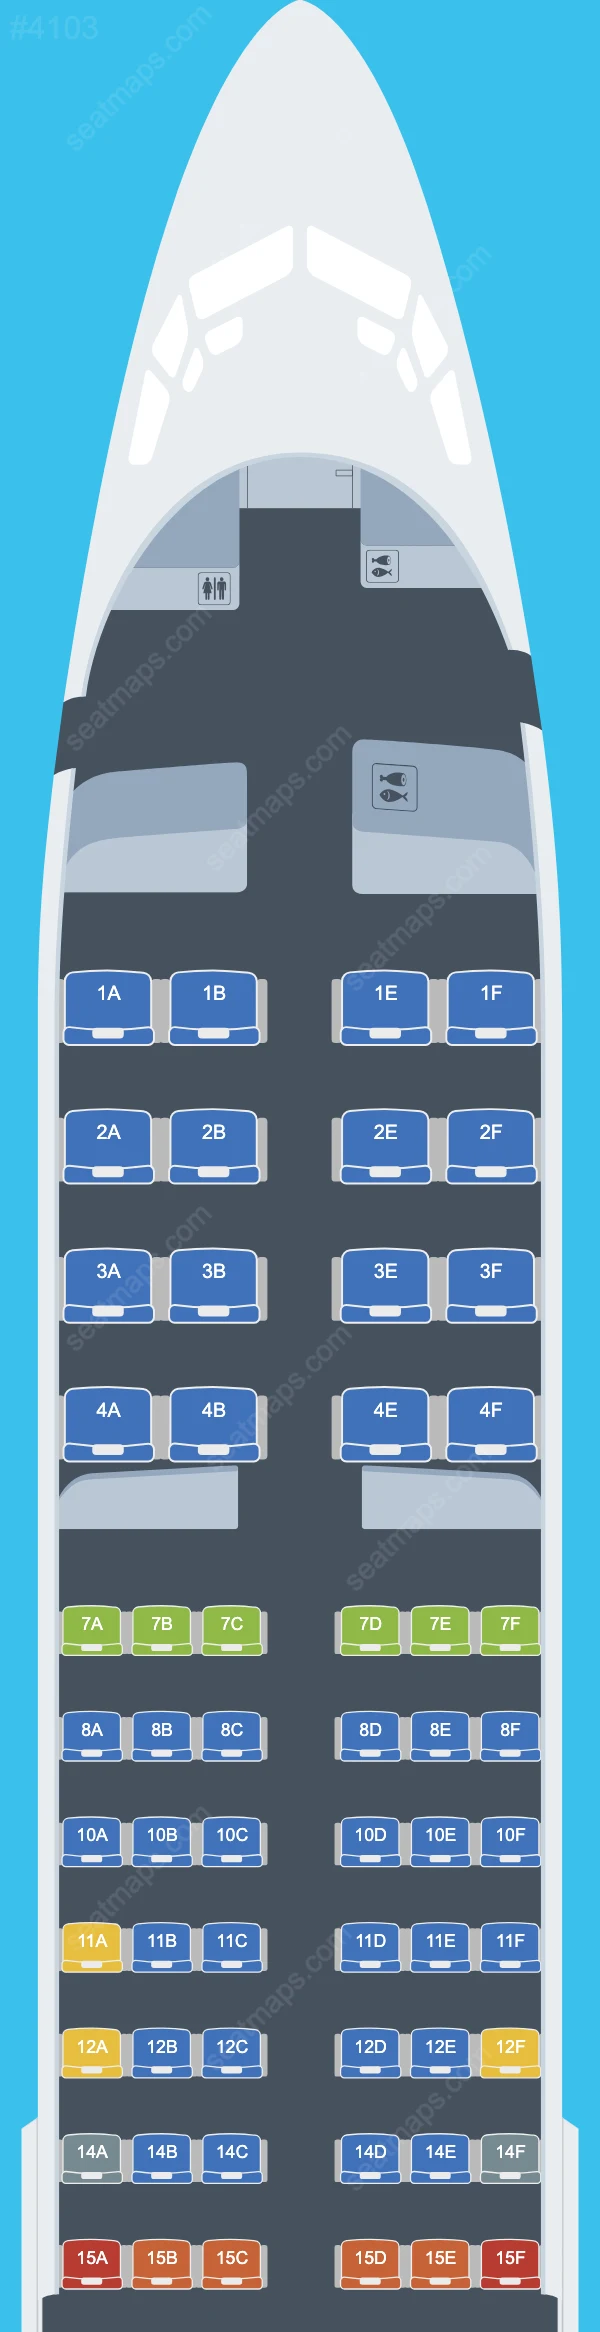 United Boeing 737-800 V.2 seatmap mobile preview